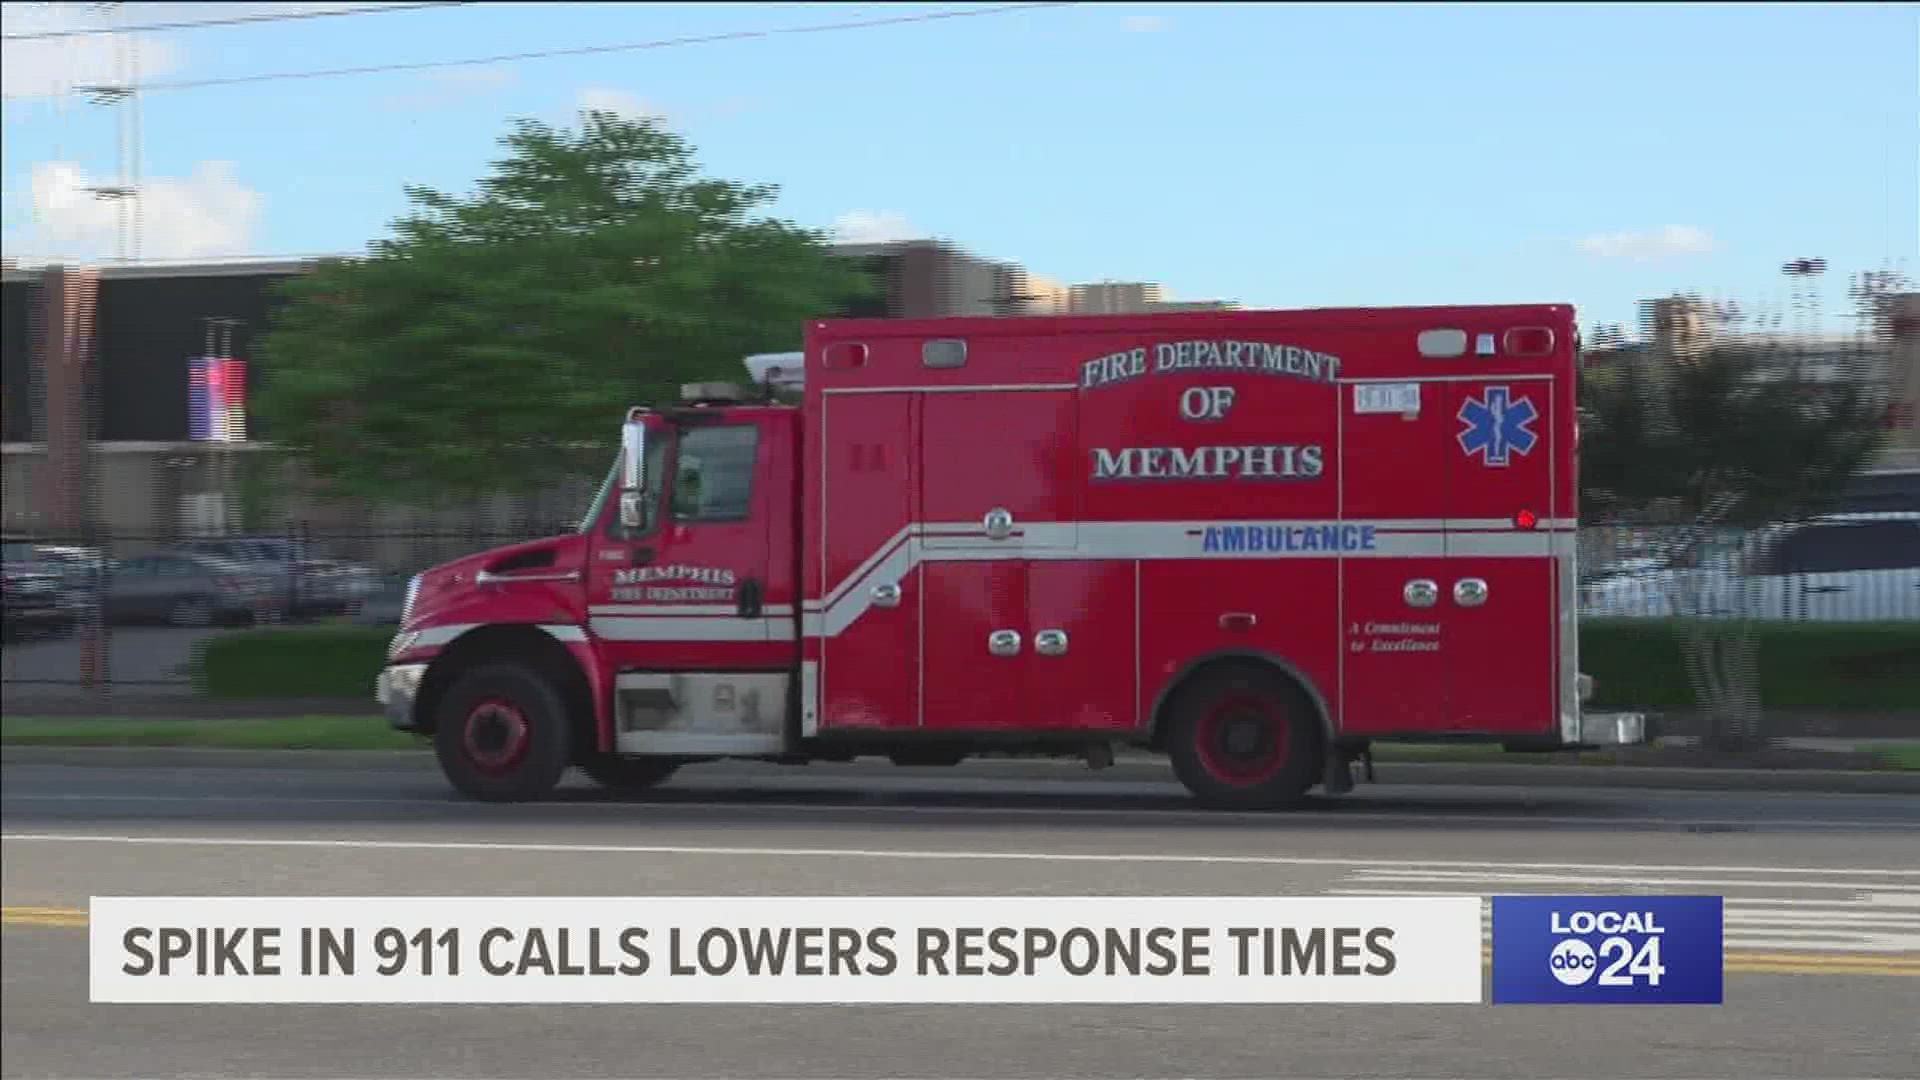 The Memphis Firefighters Association said its EMTs and paramedics can help treat people while they wait for an ambulance